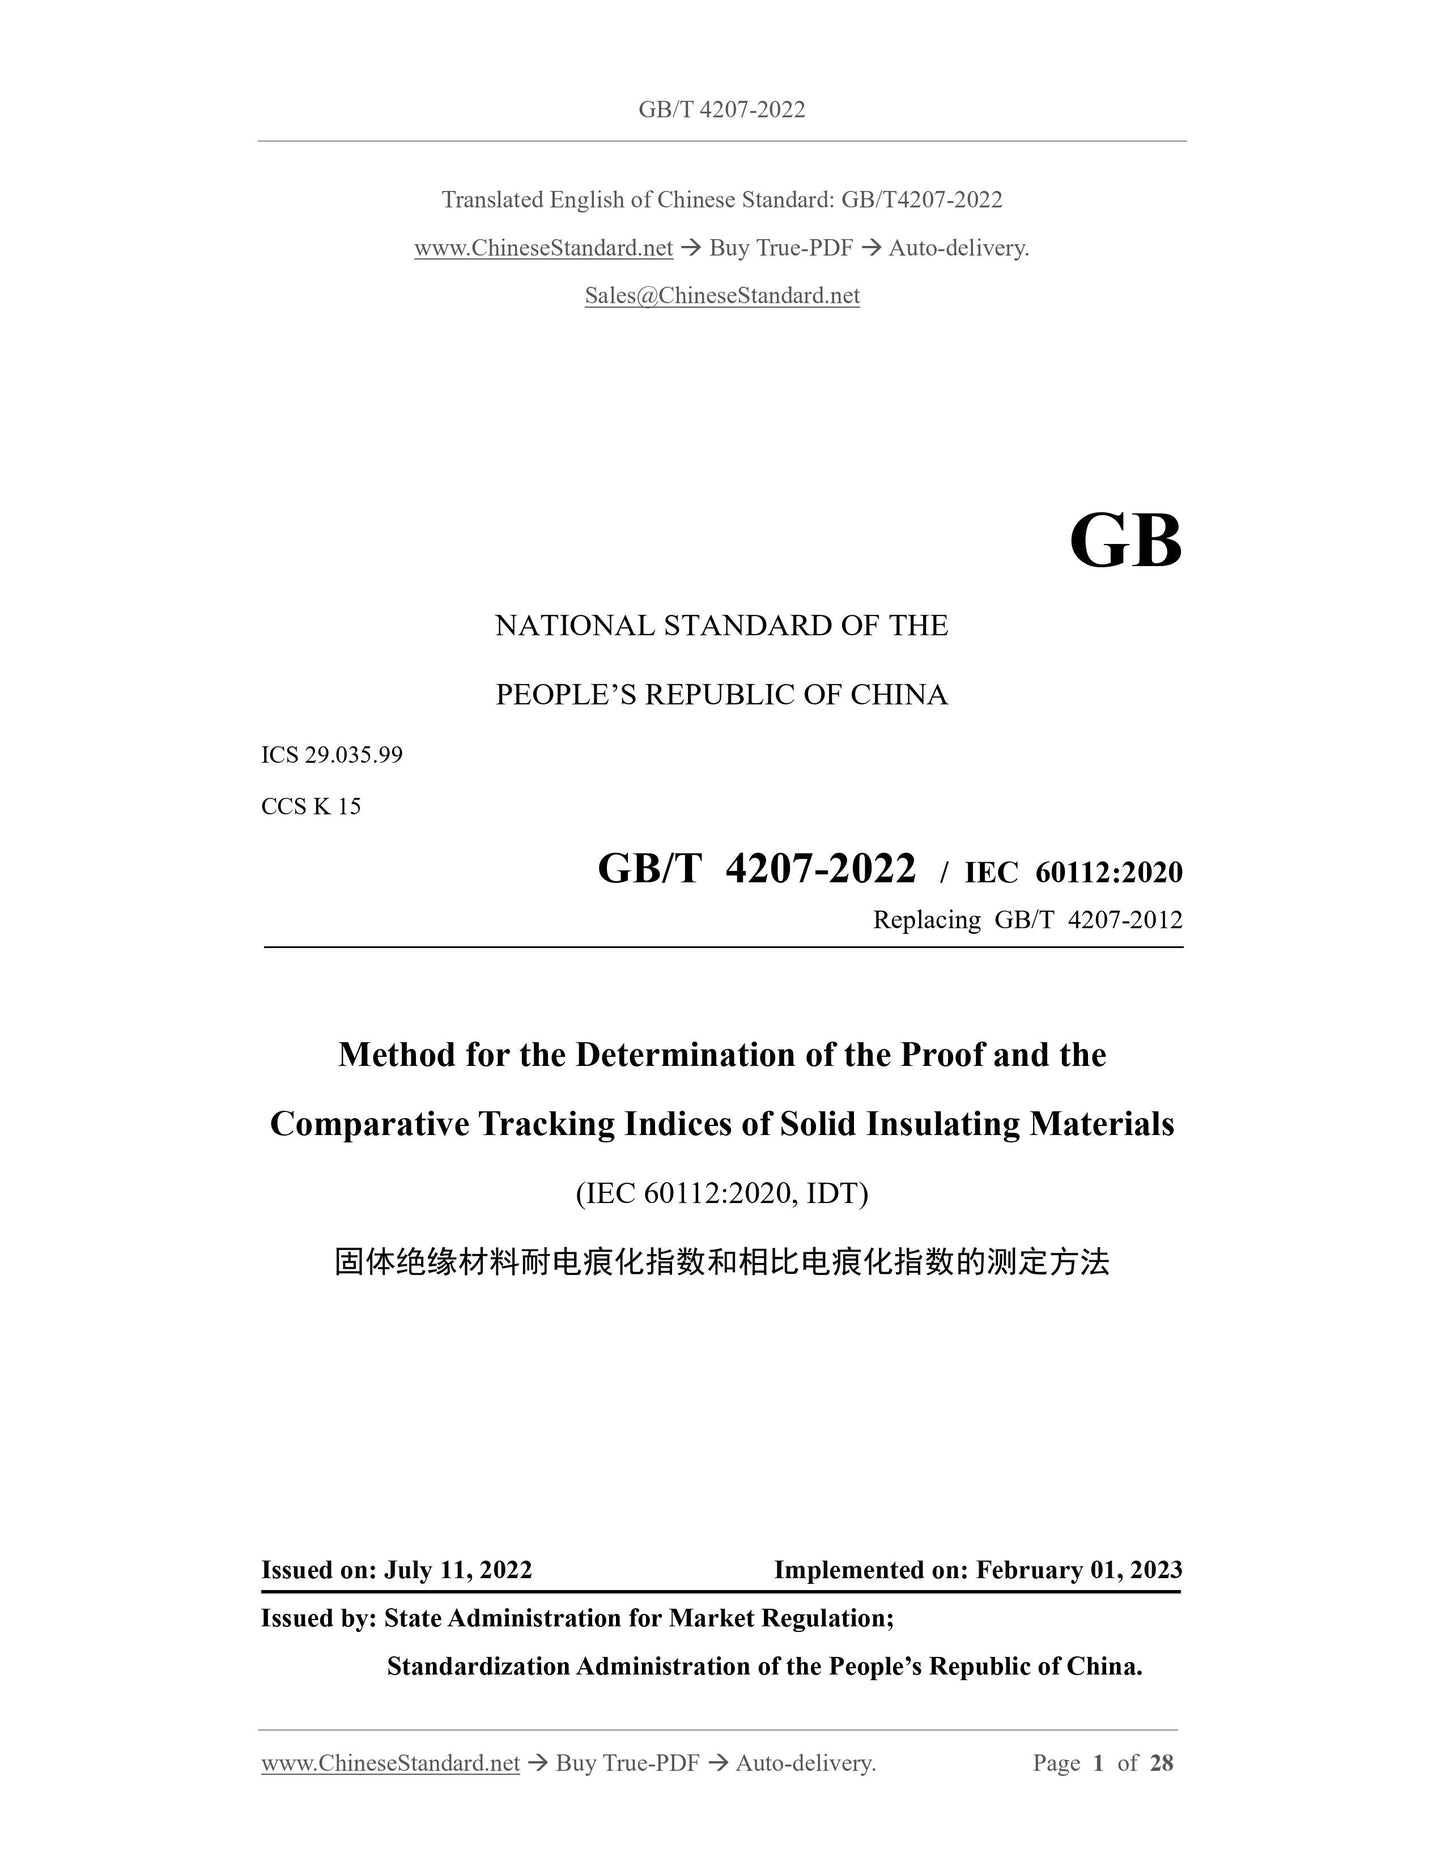 GB/T 4207-2022 Page 1